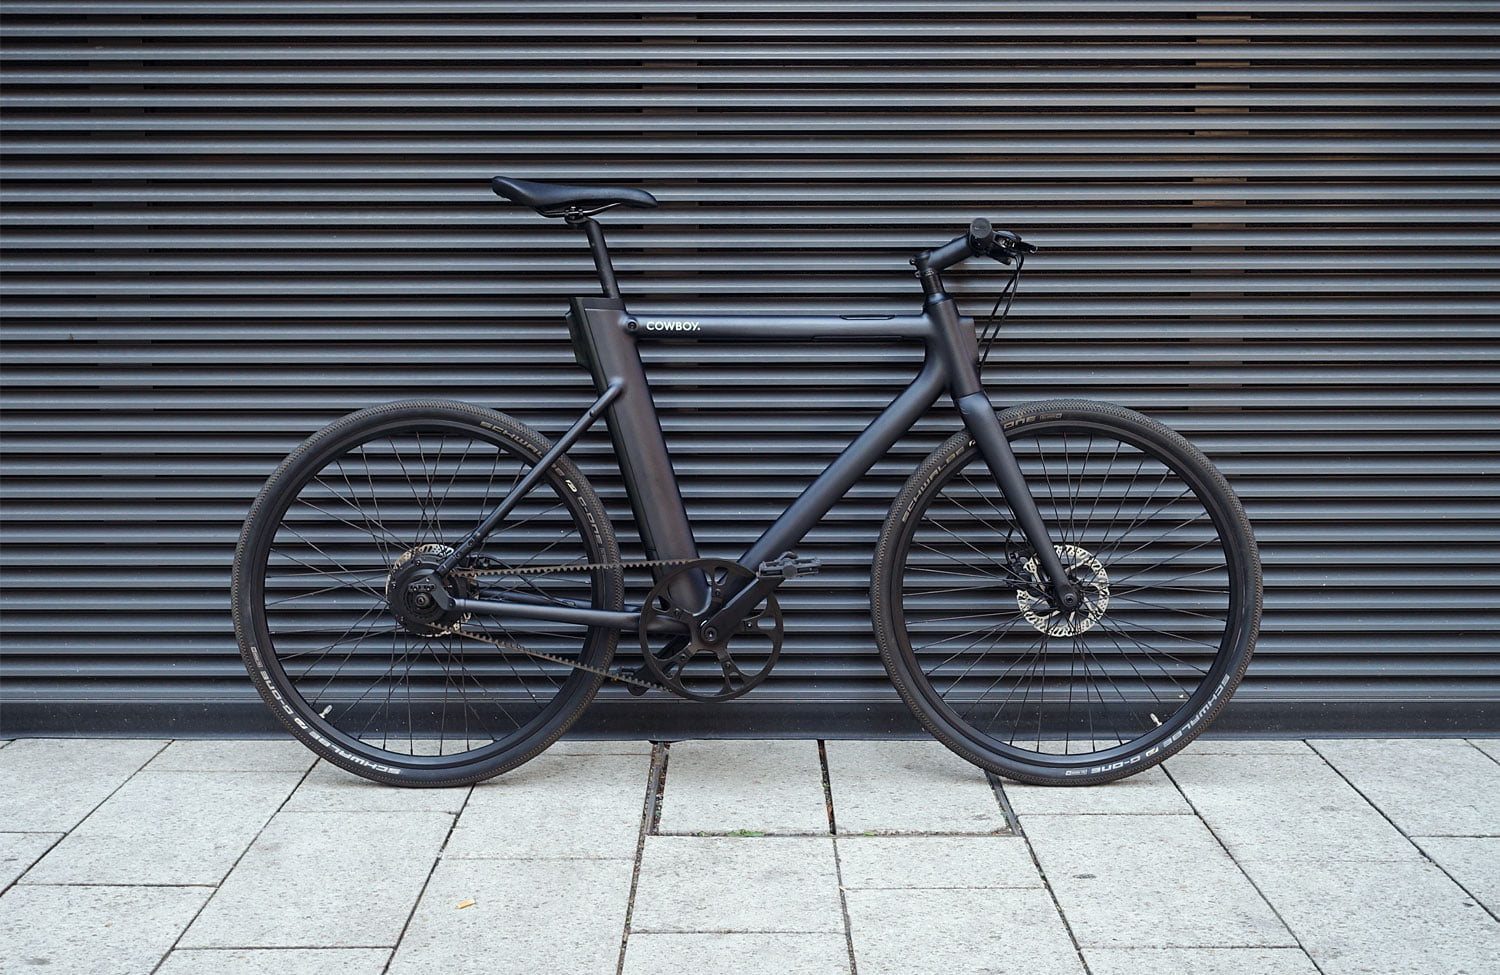 Test: an e-bike with smart features and an — urbanbike.news